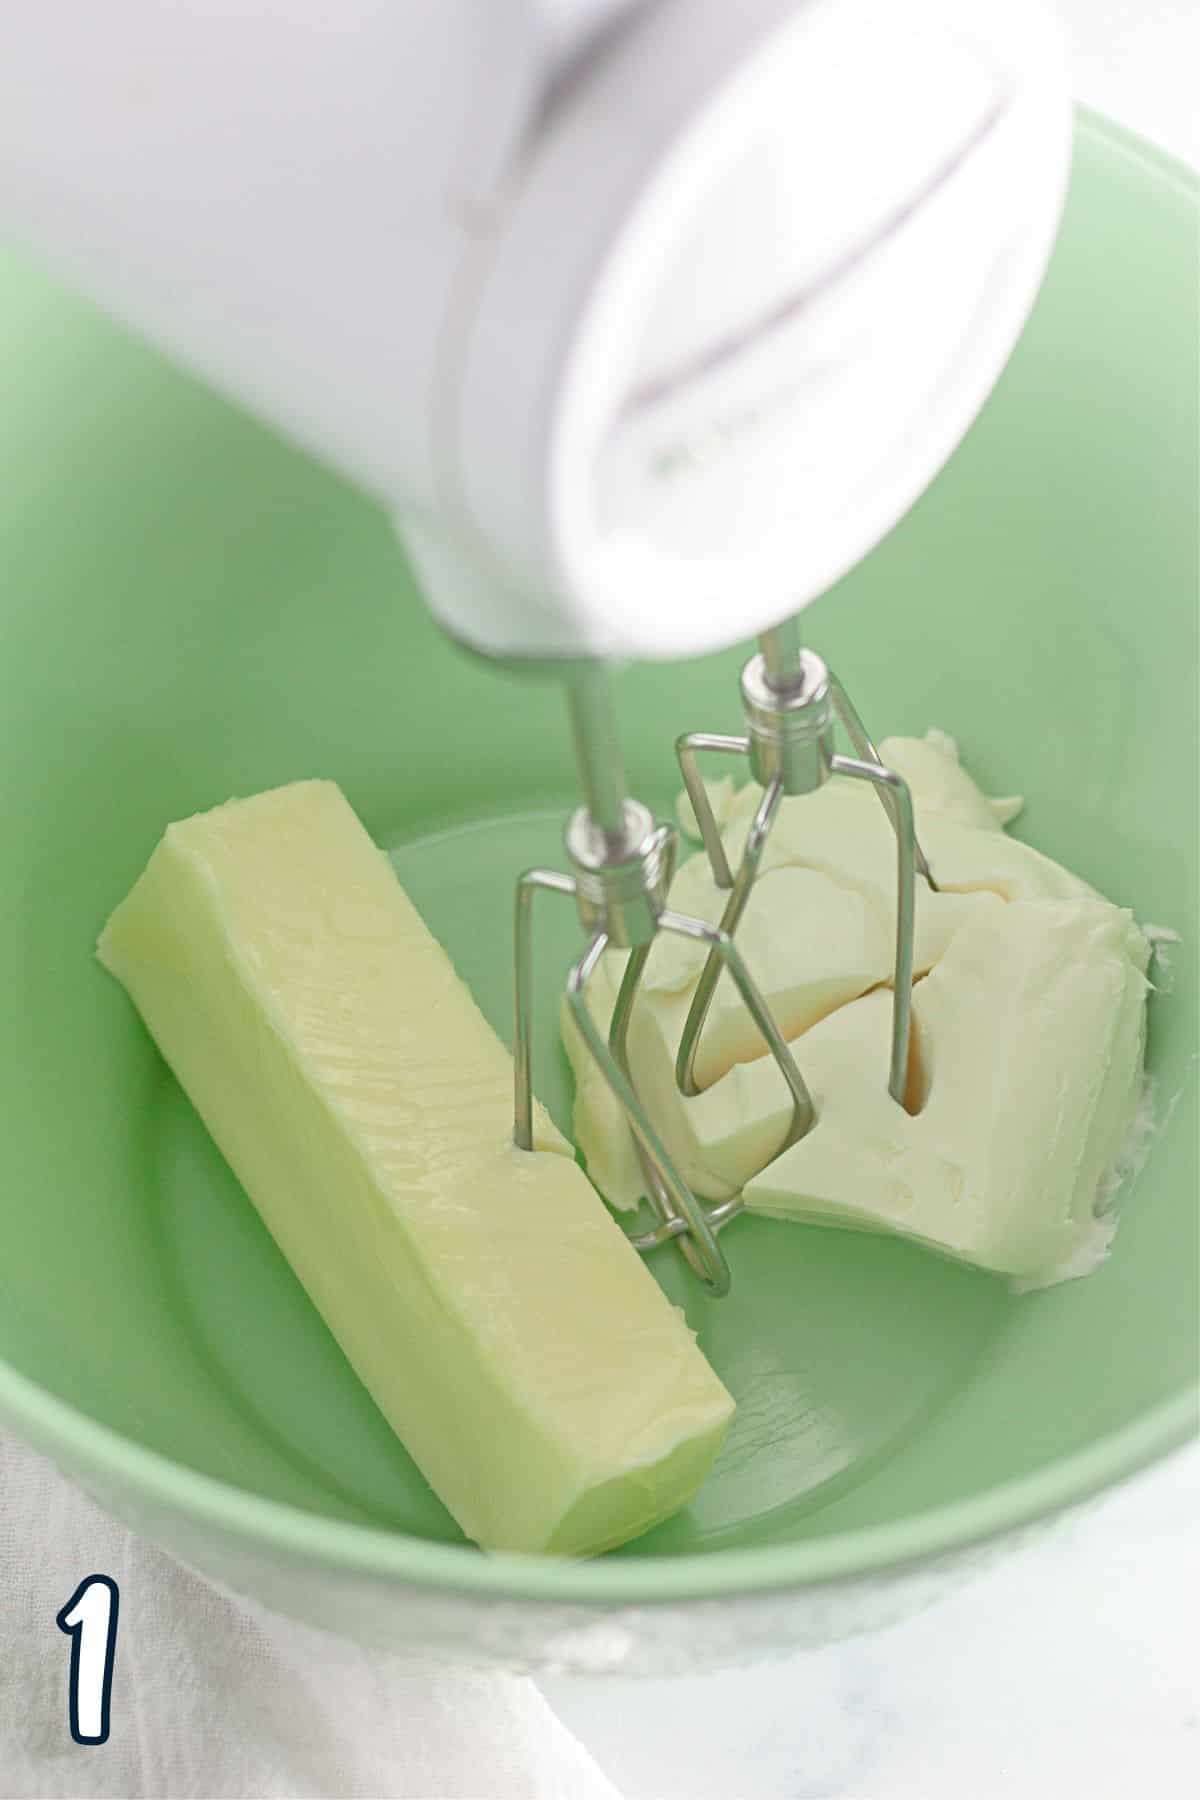 A green bowl with butter  and a mixer in it.